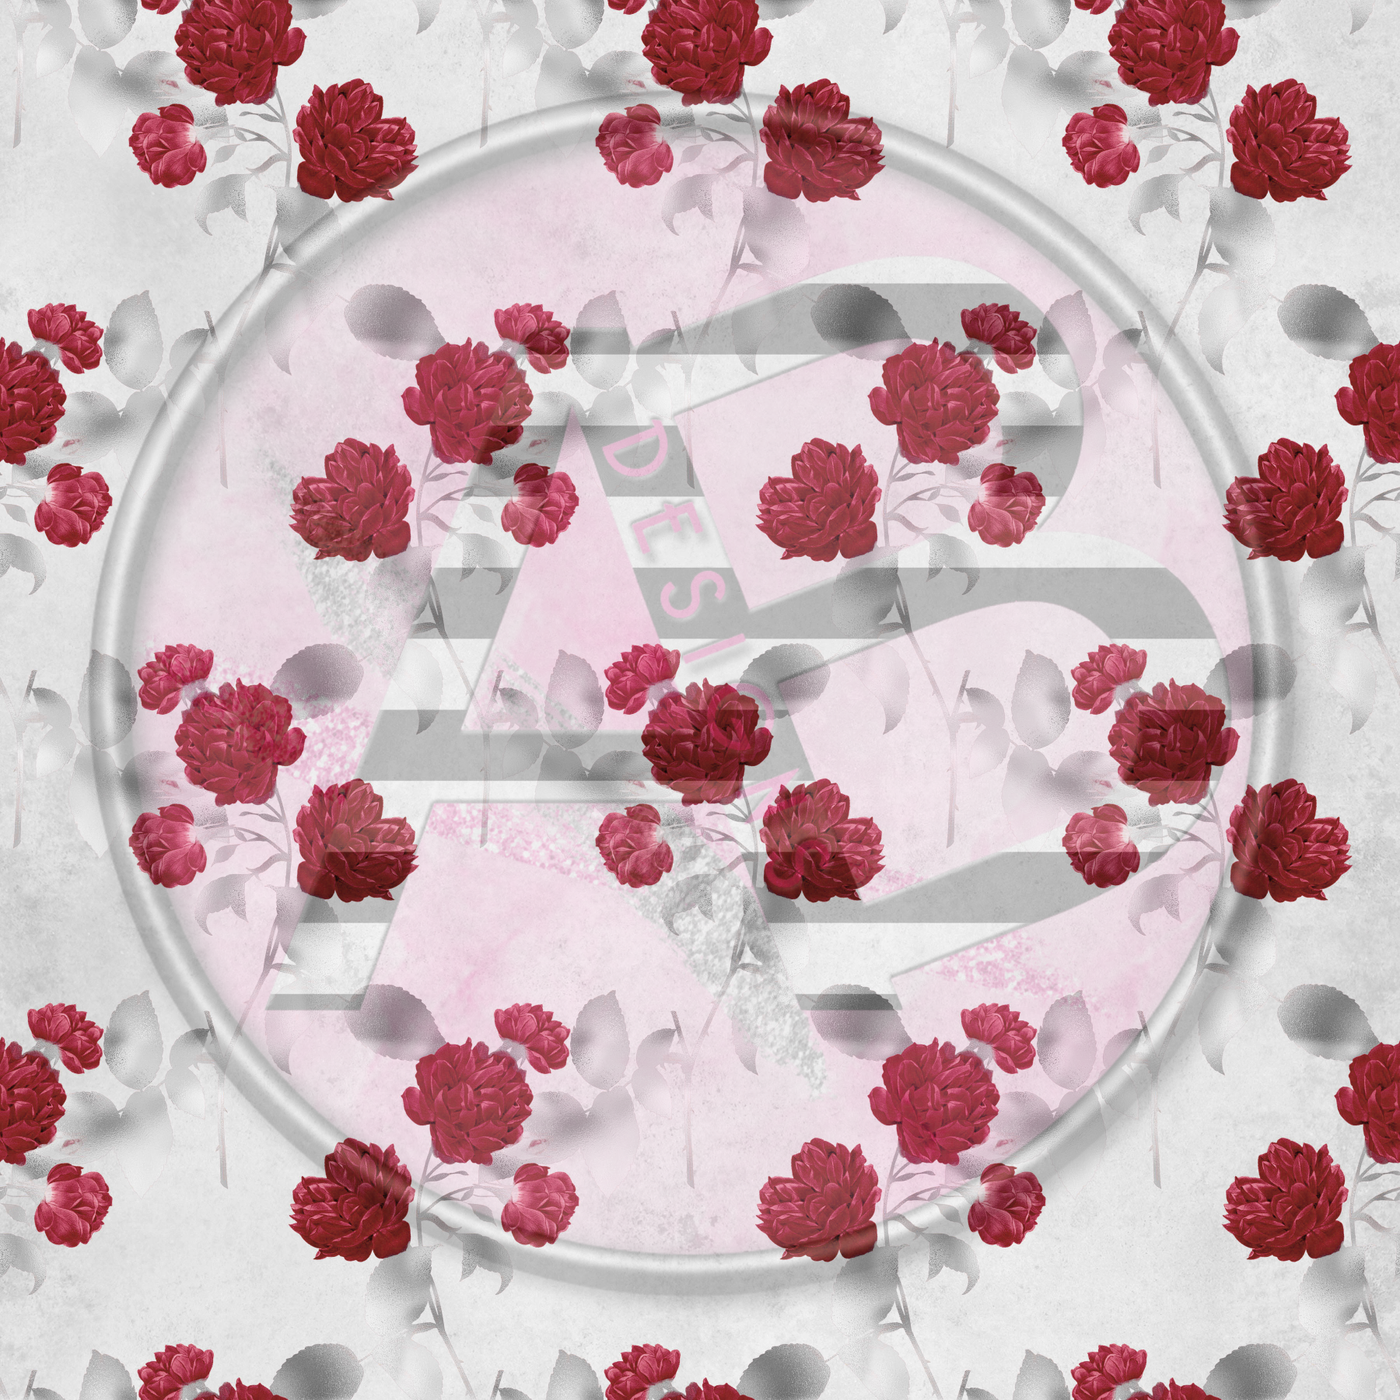 Adhesive Patterned Vinyl - Red & Silver Roses 14